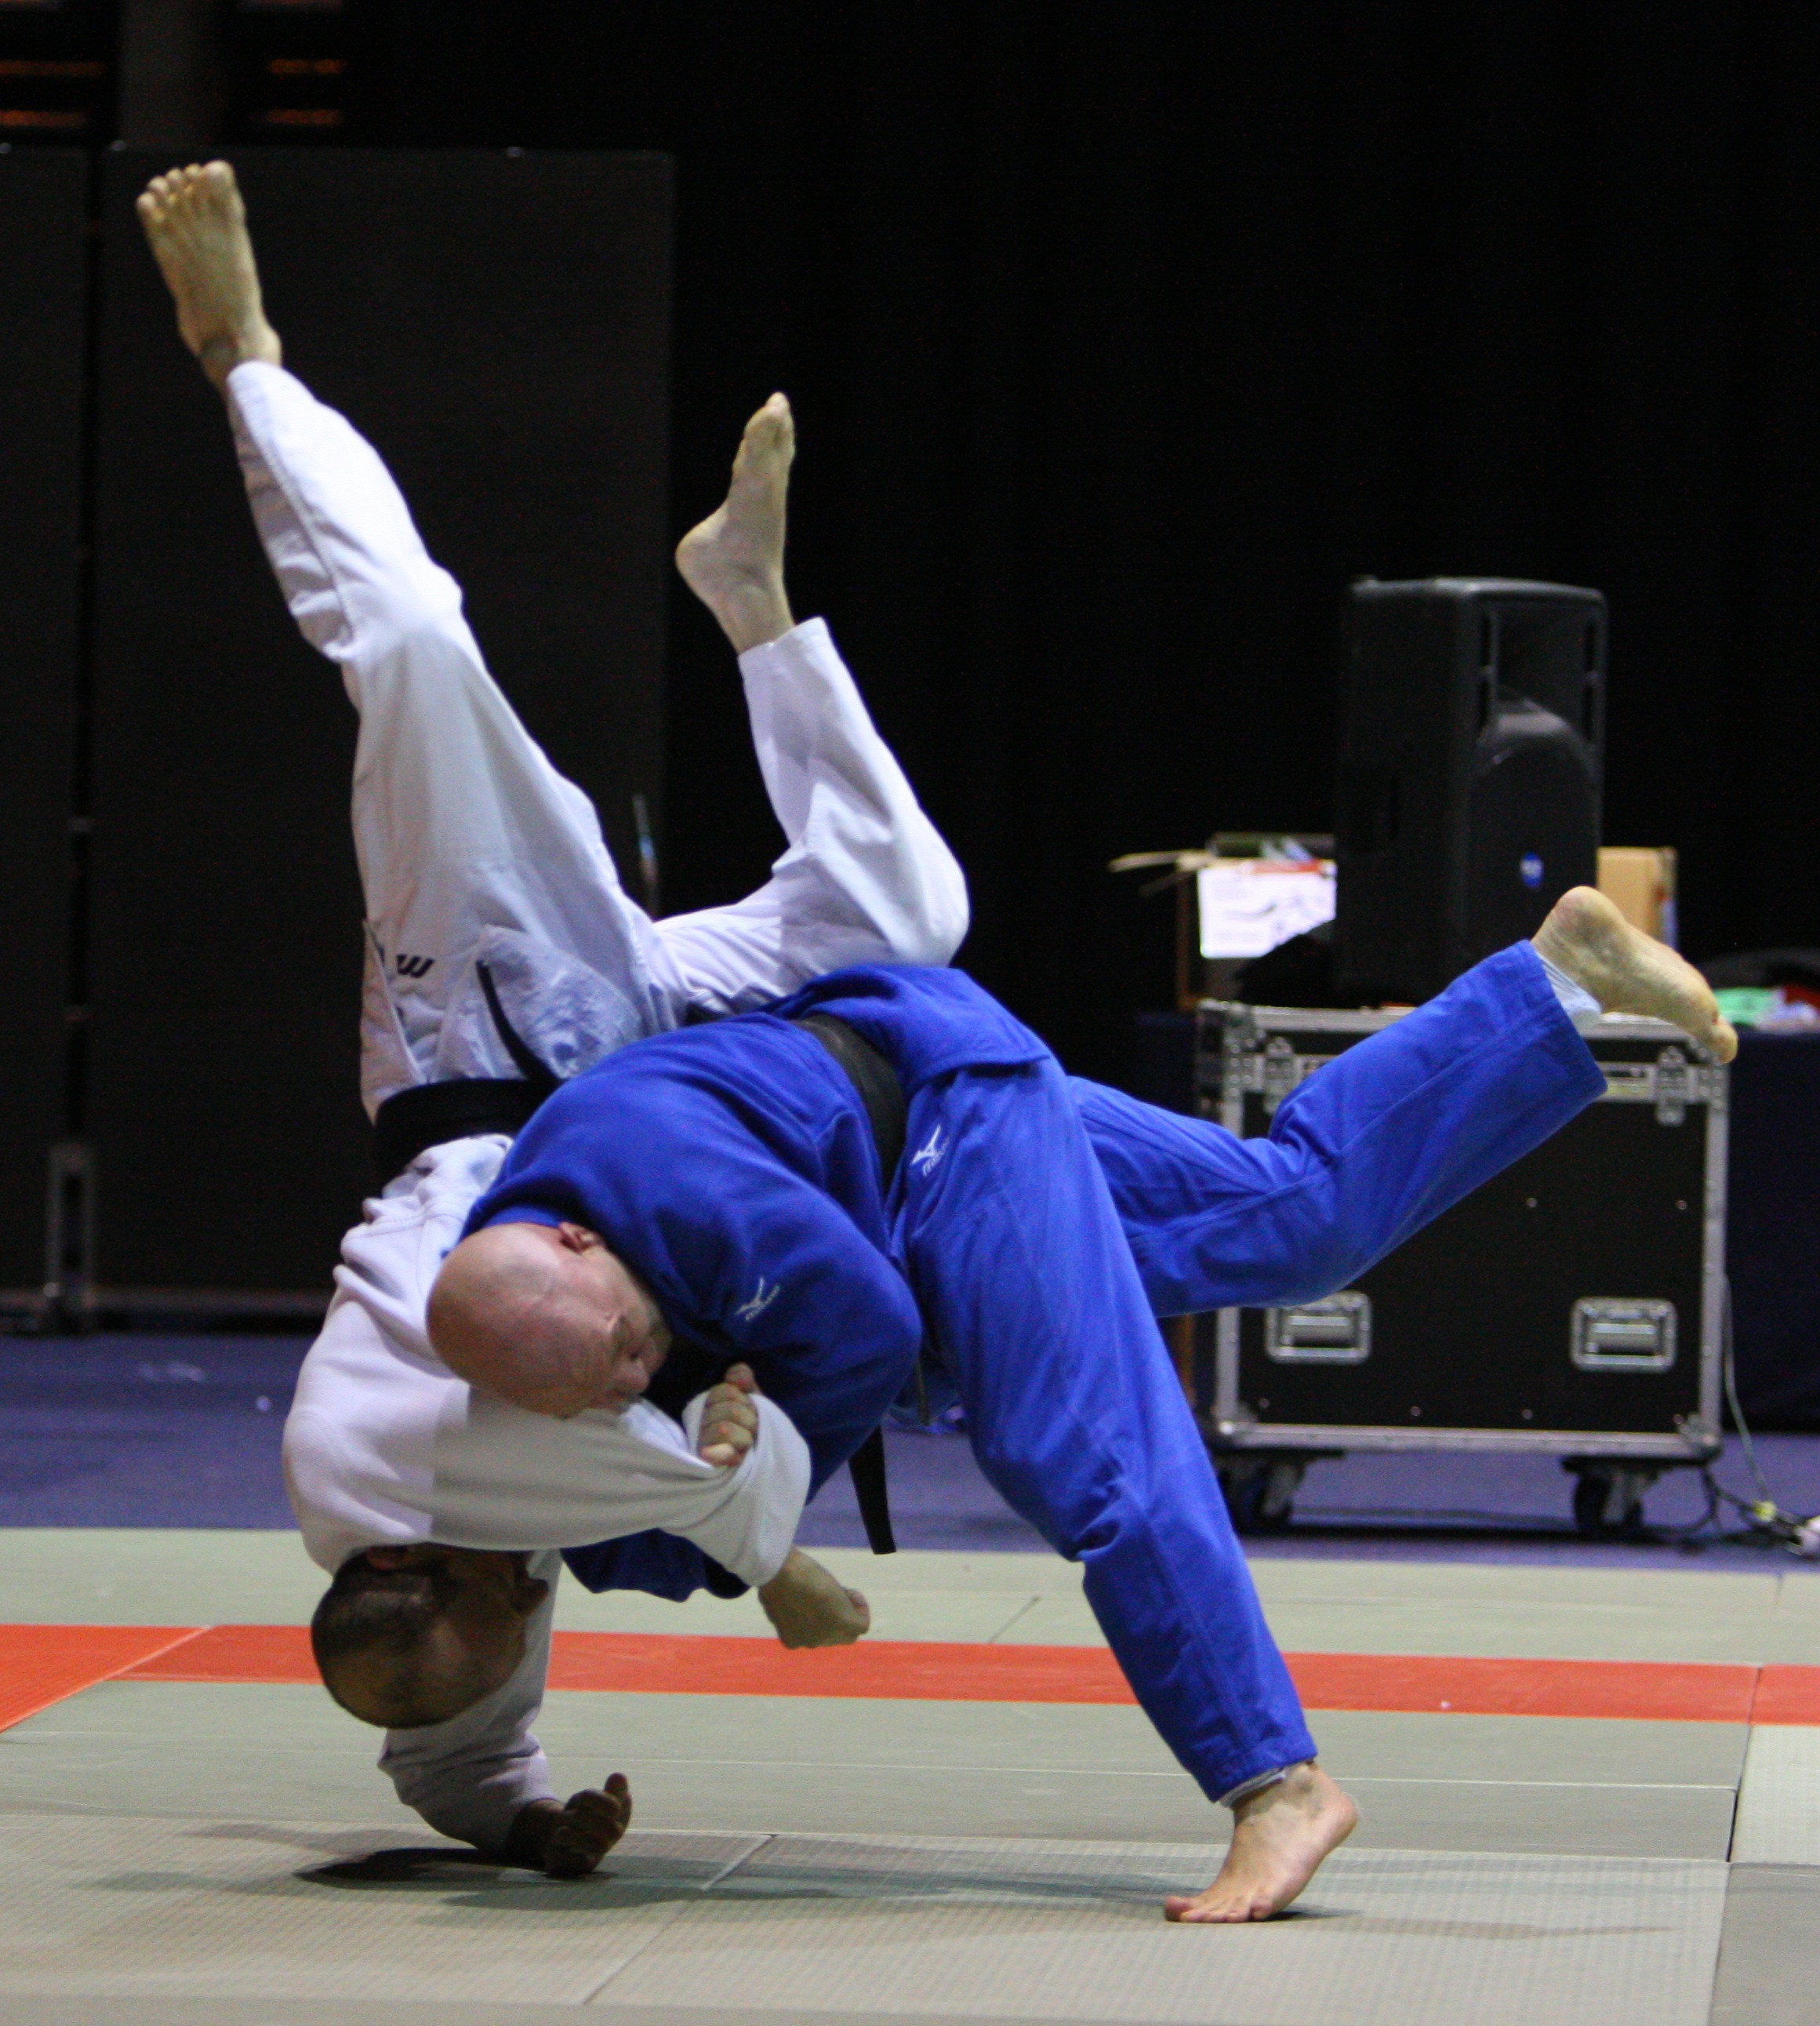 The judo master looking for three-in-a-row Pan Pacific Masters Games